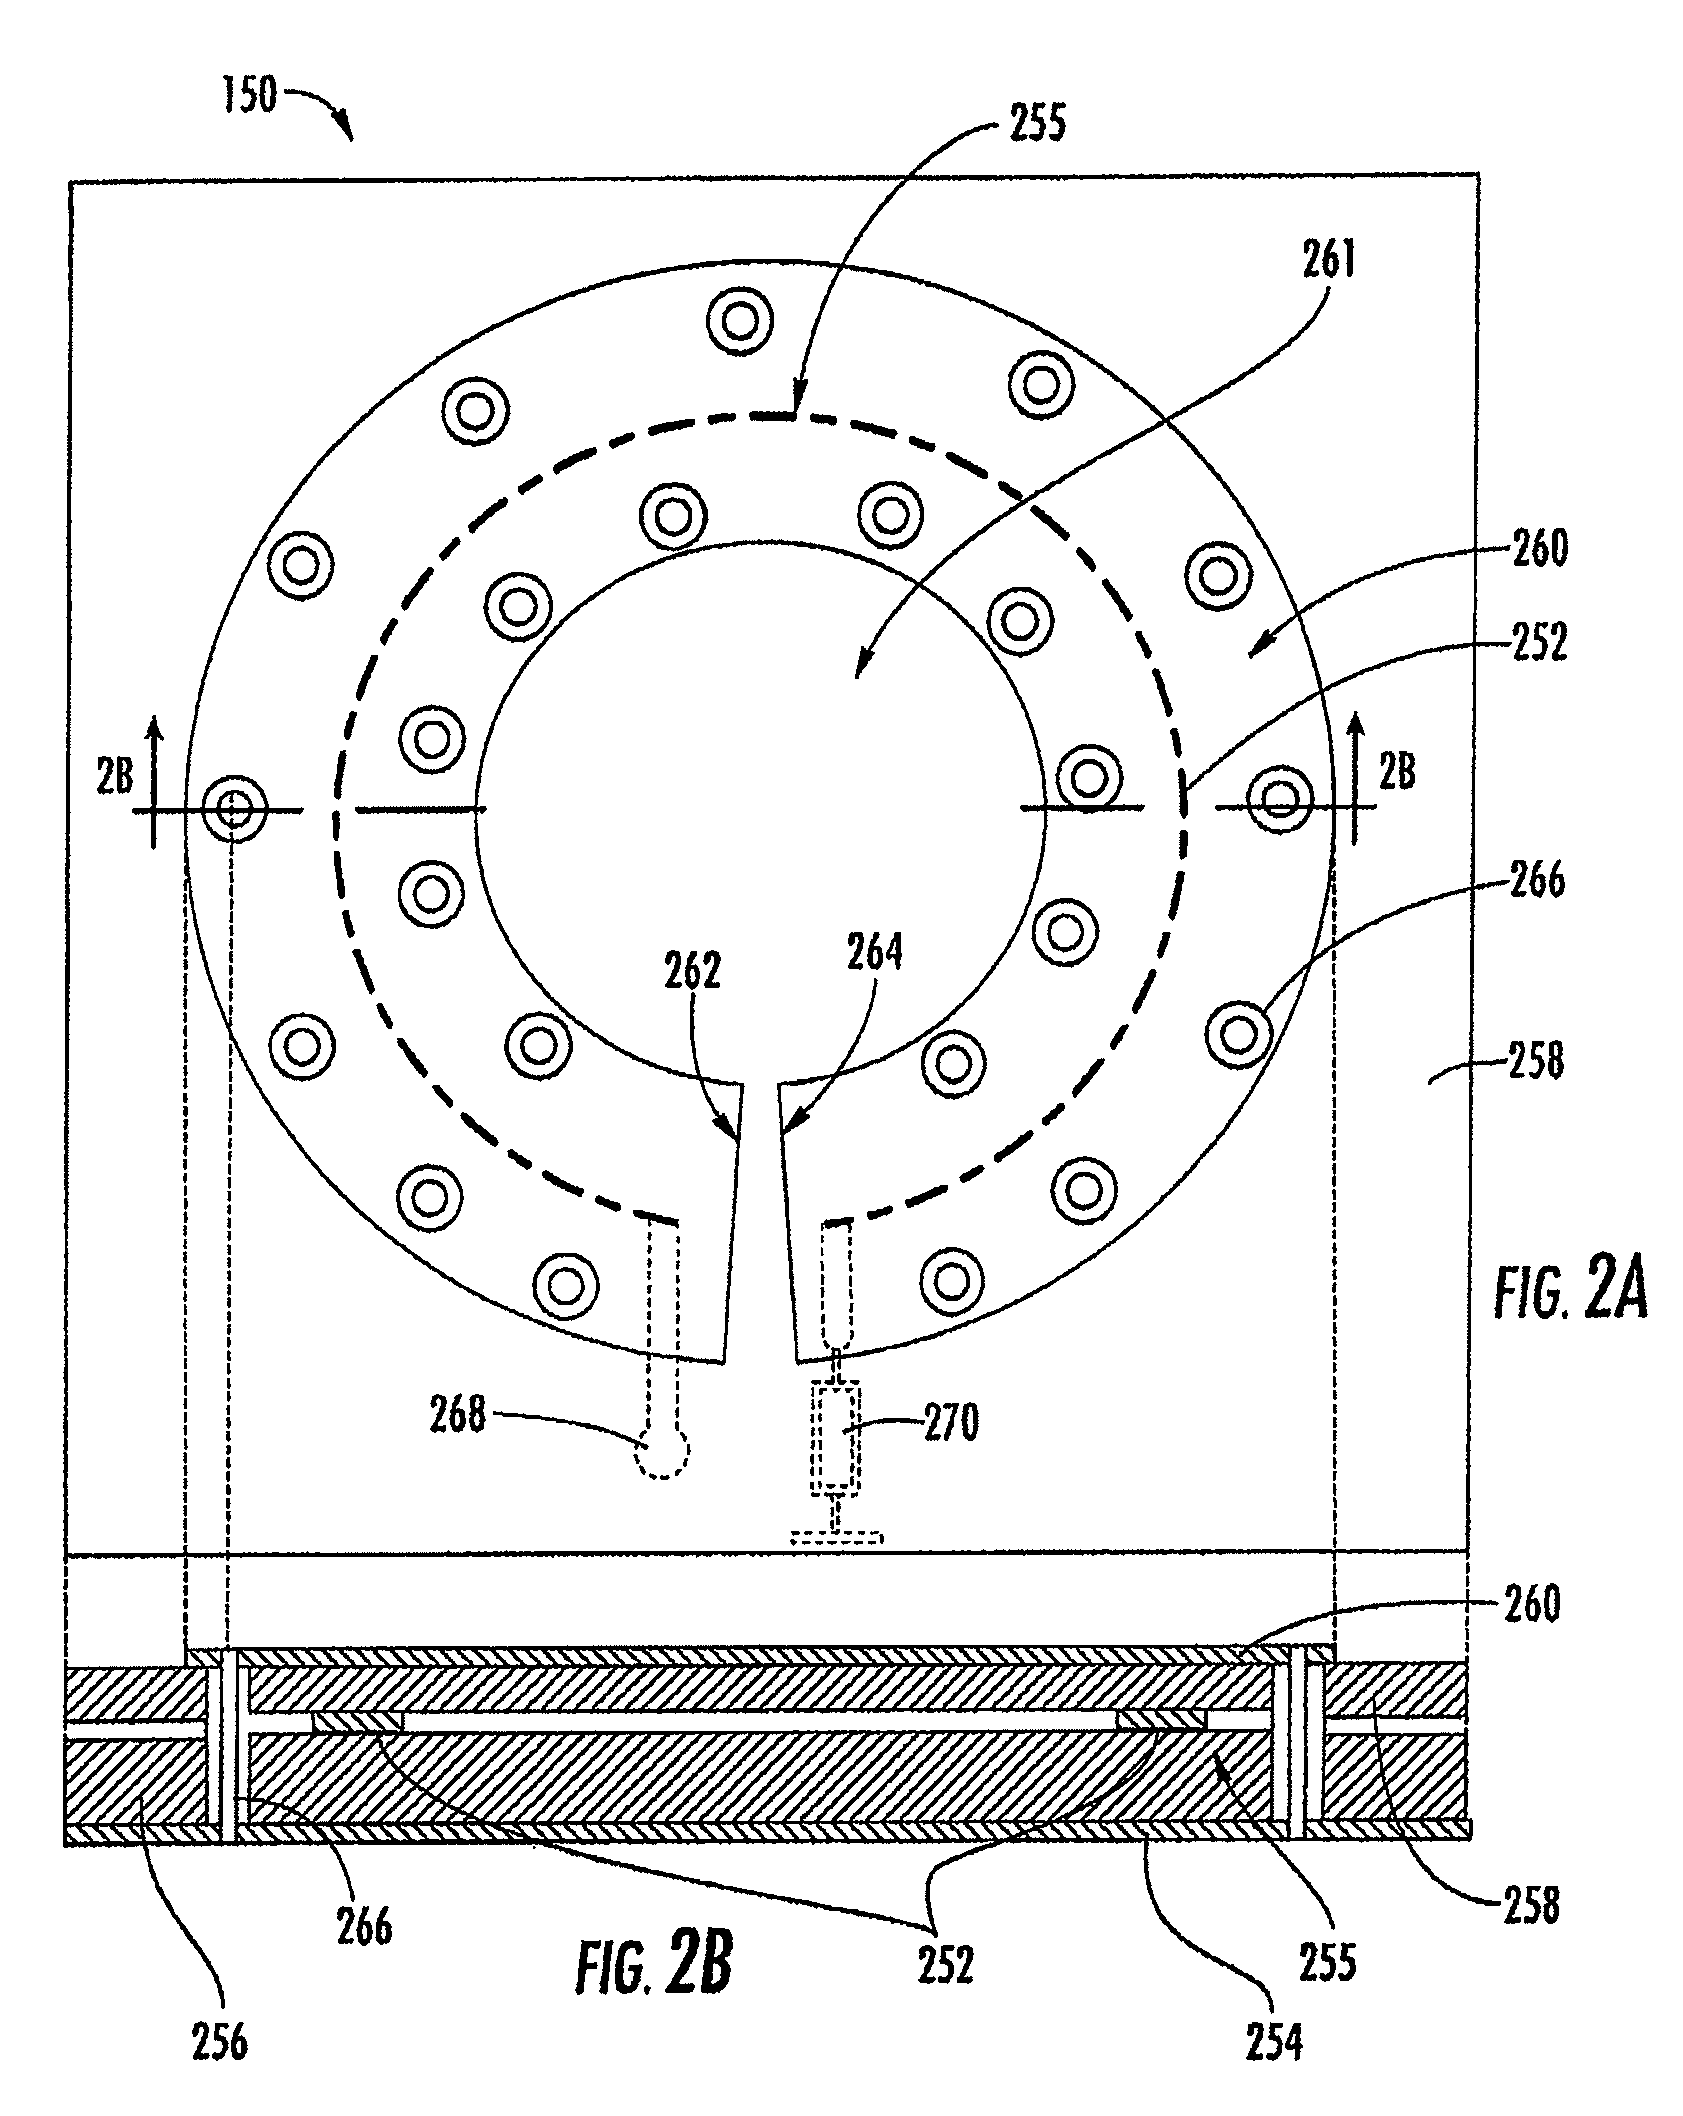 Encoding module, associated encoding element, connector, printer-encoder and access control system